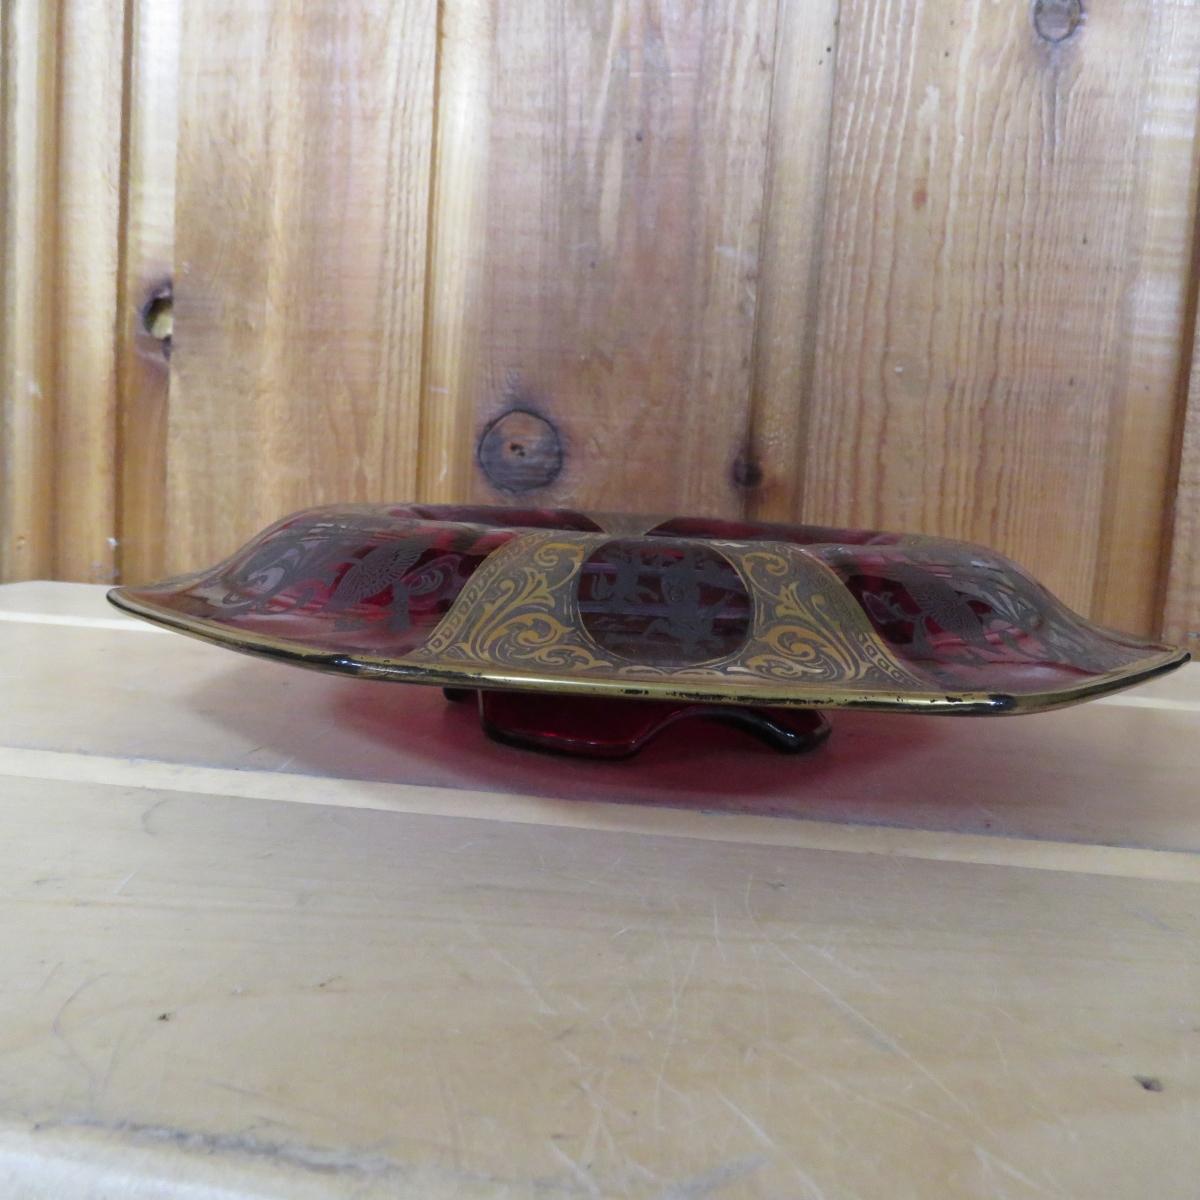 Antique Red & Gold Glass Bowl, EAPG & Cut Glass